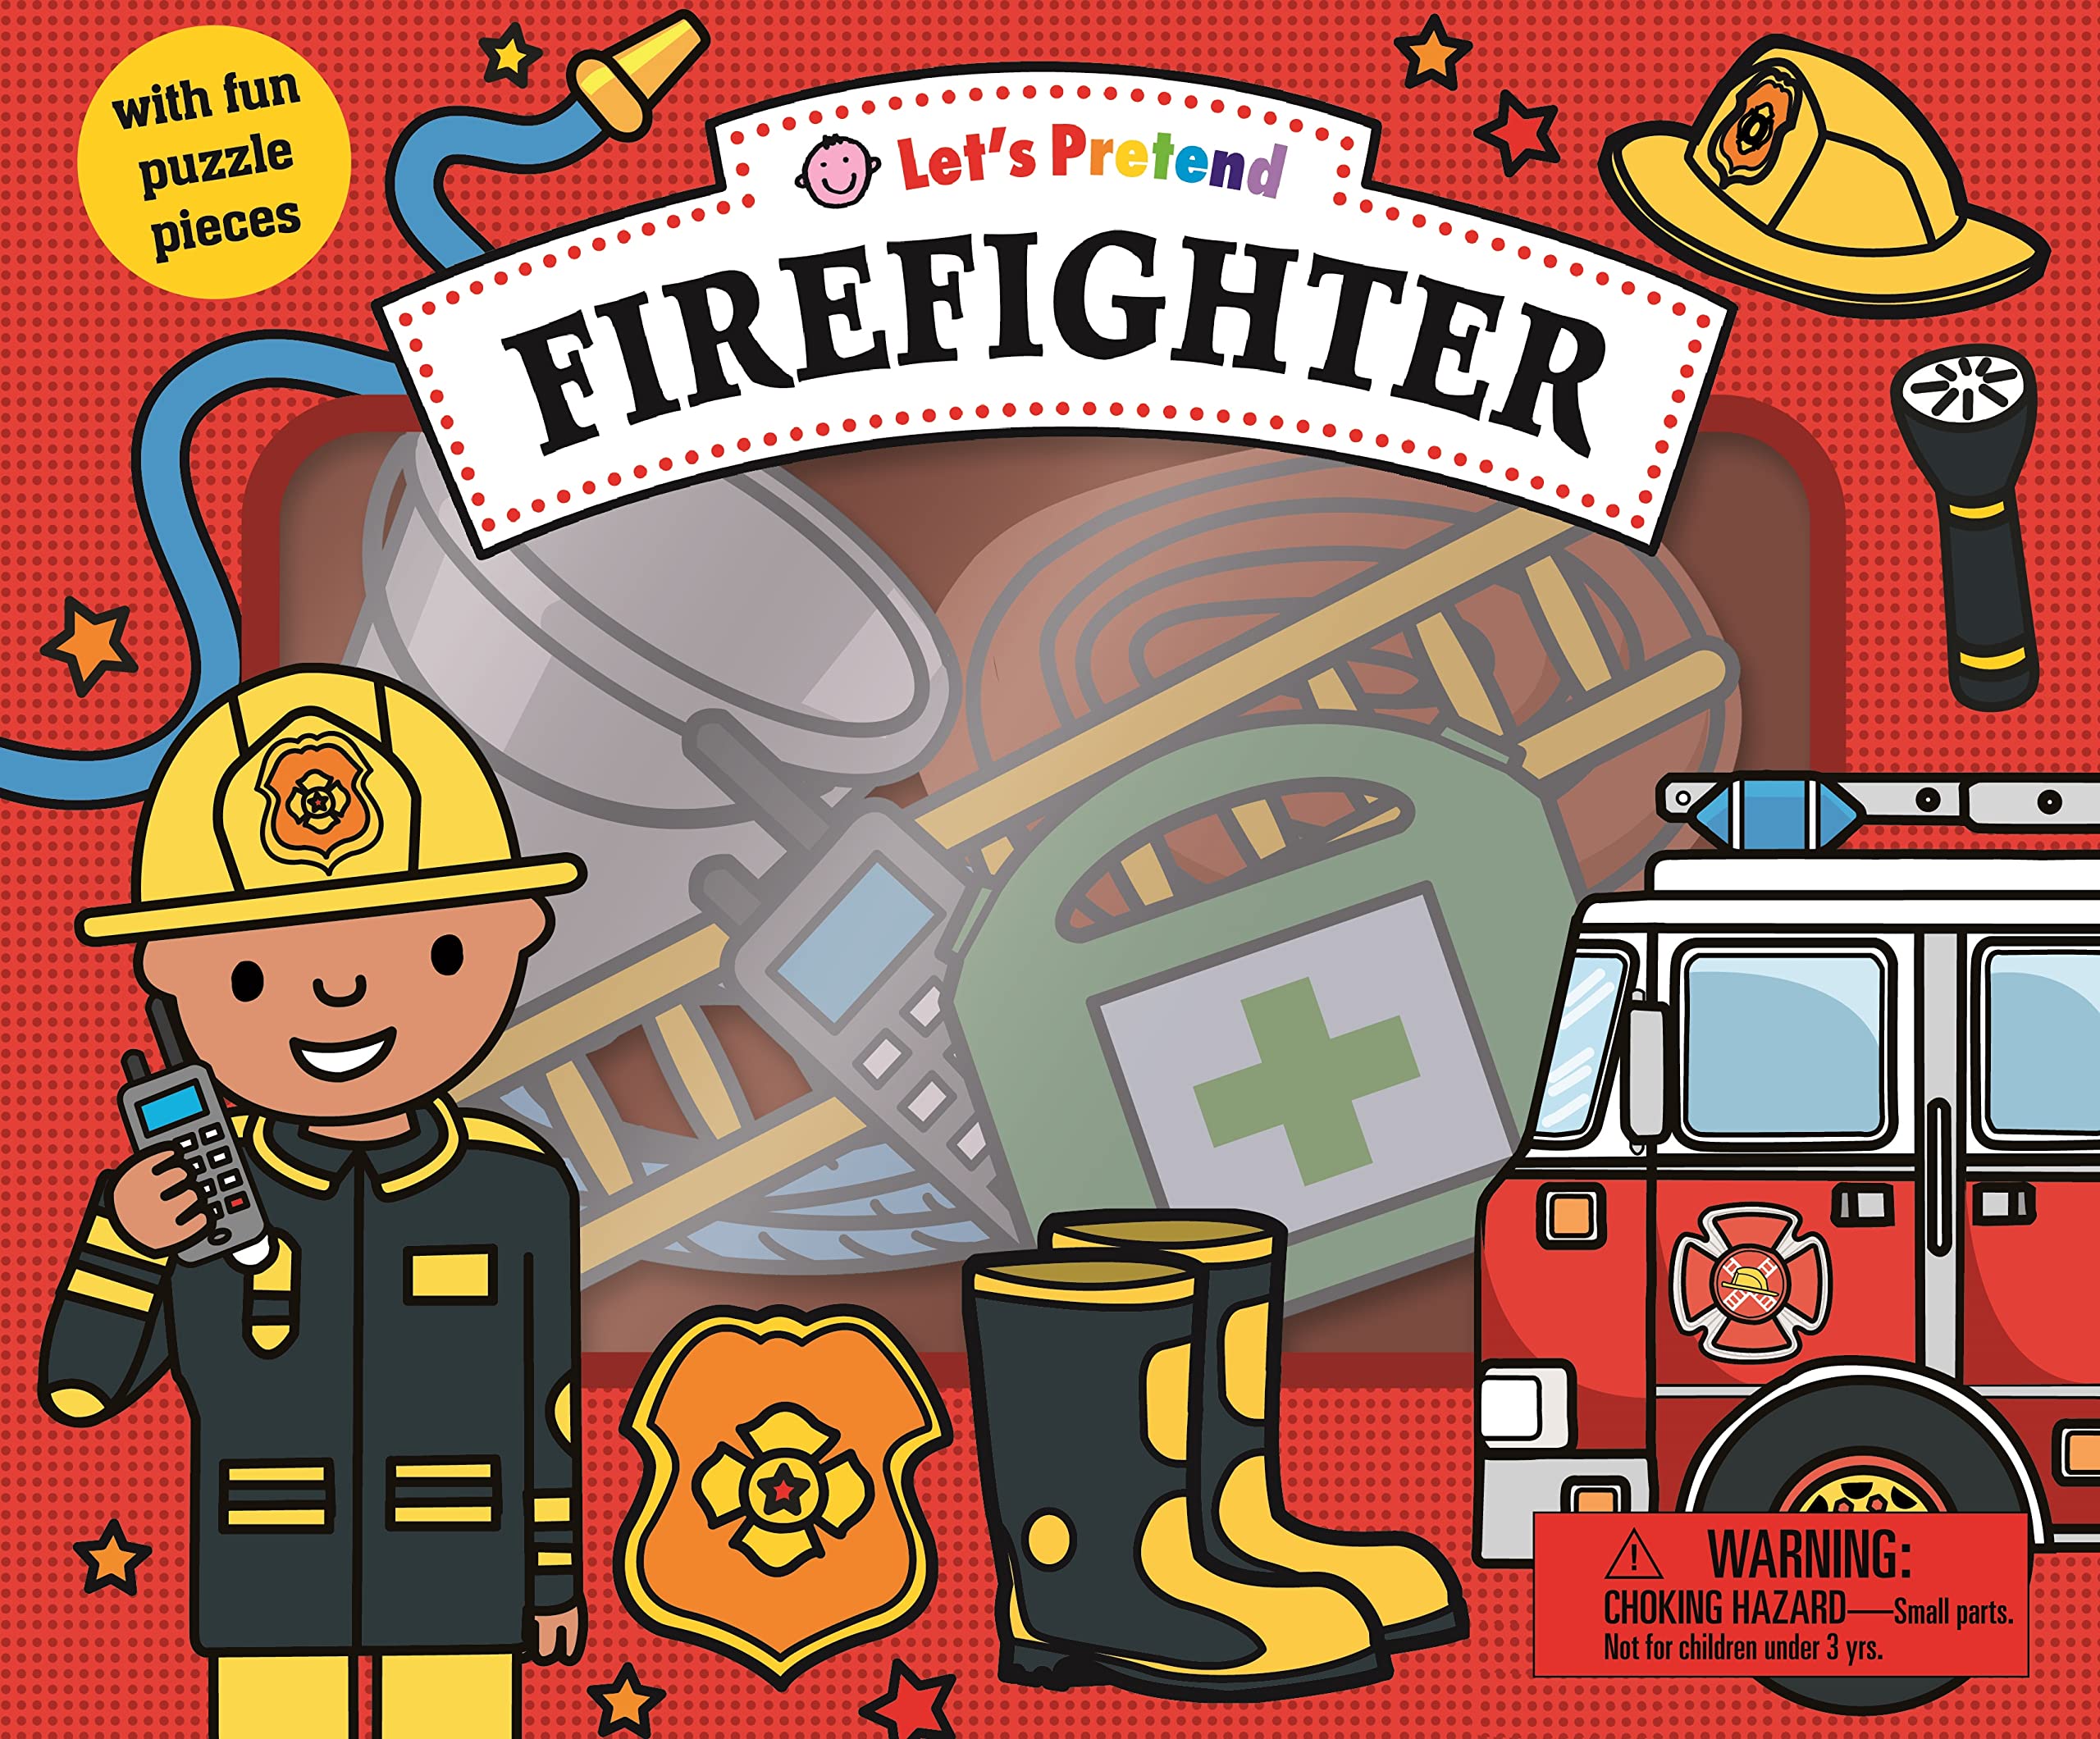 Lets Pretend: Firefighter Set: With Fun Puzzle Pieces (Board Books)